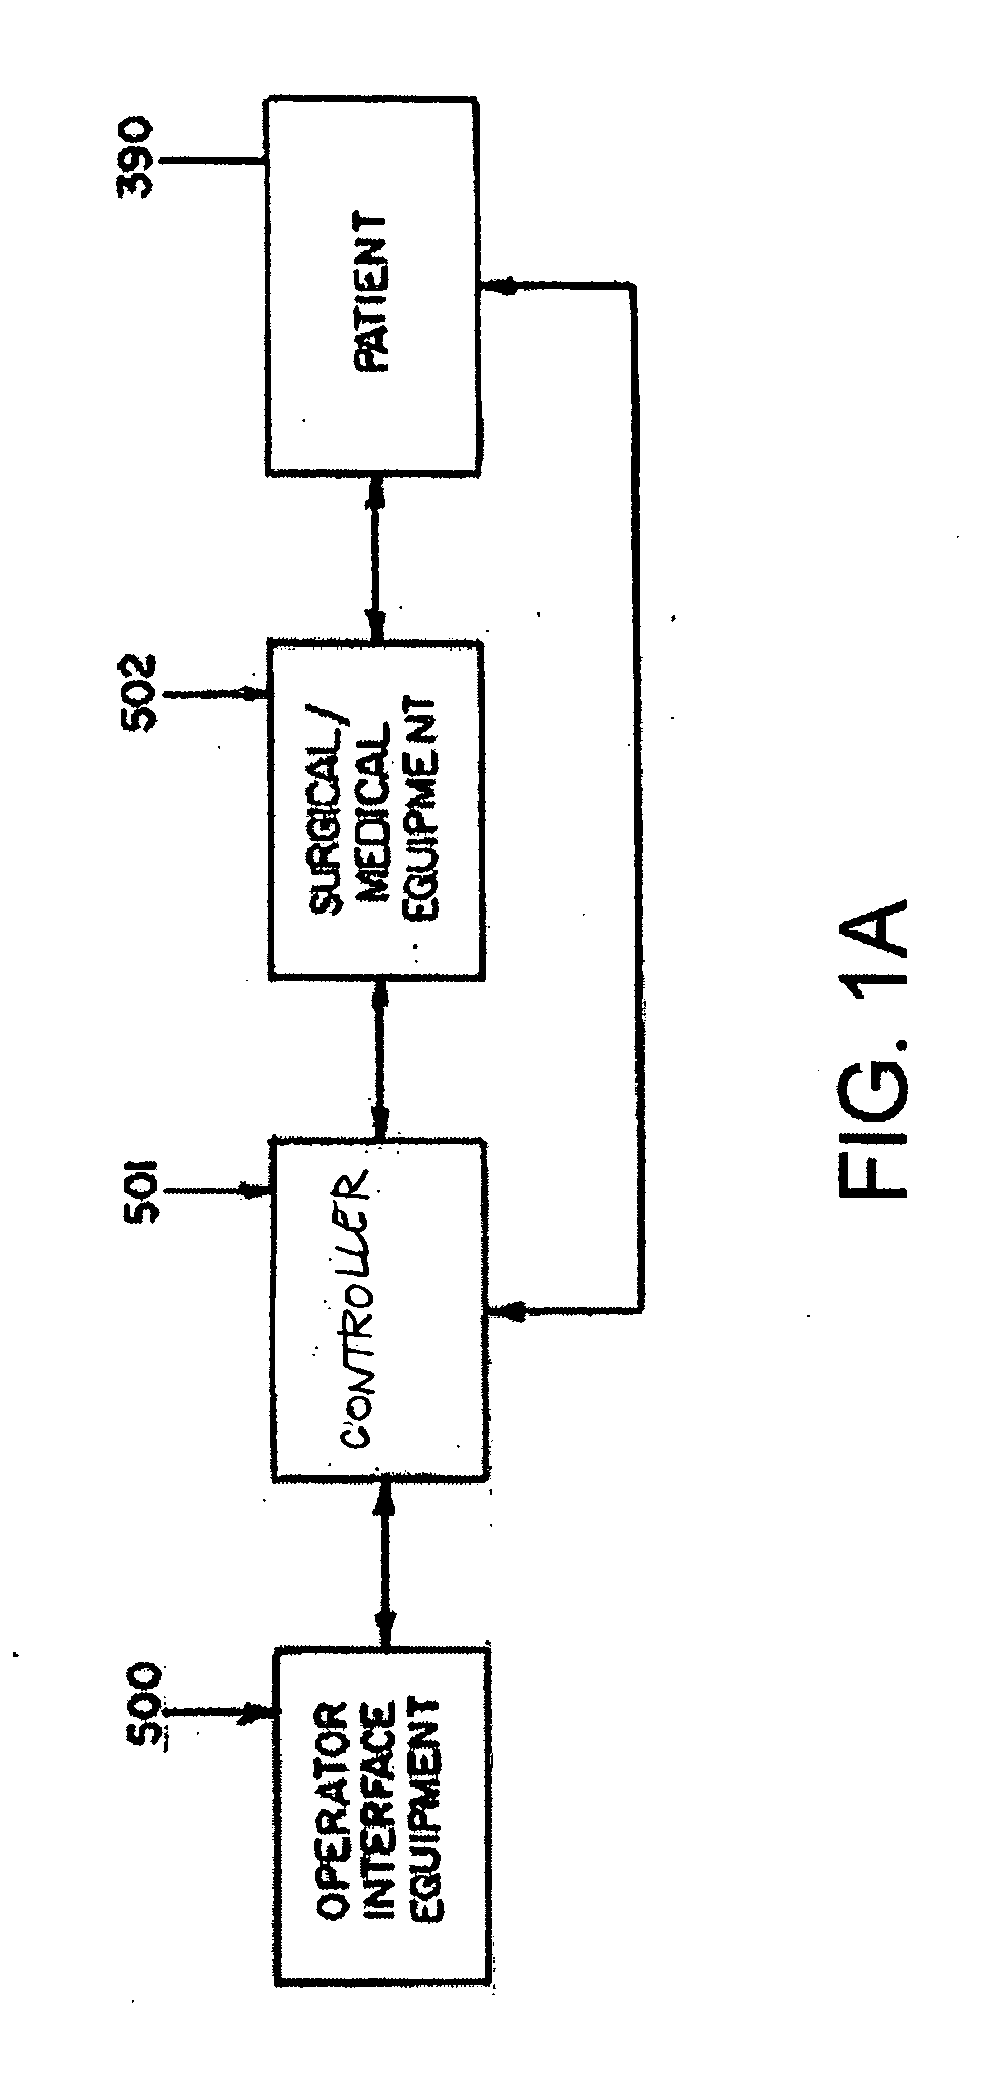 Apparatus and method for generating a magnetic field